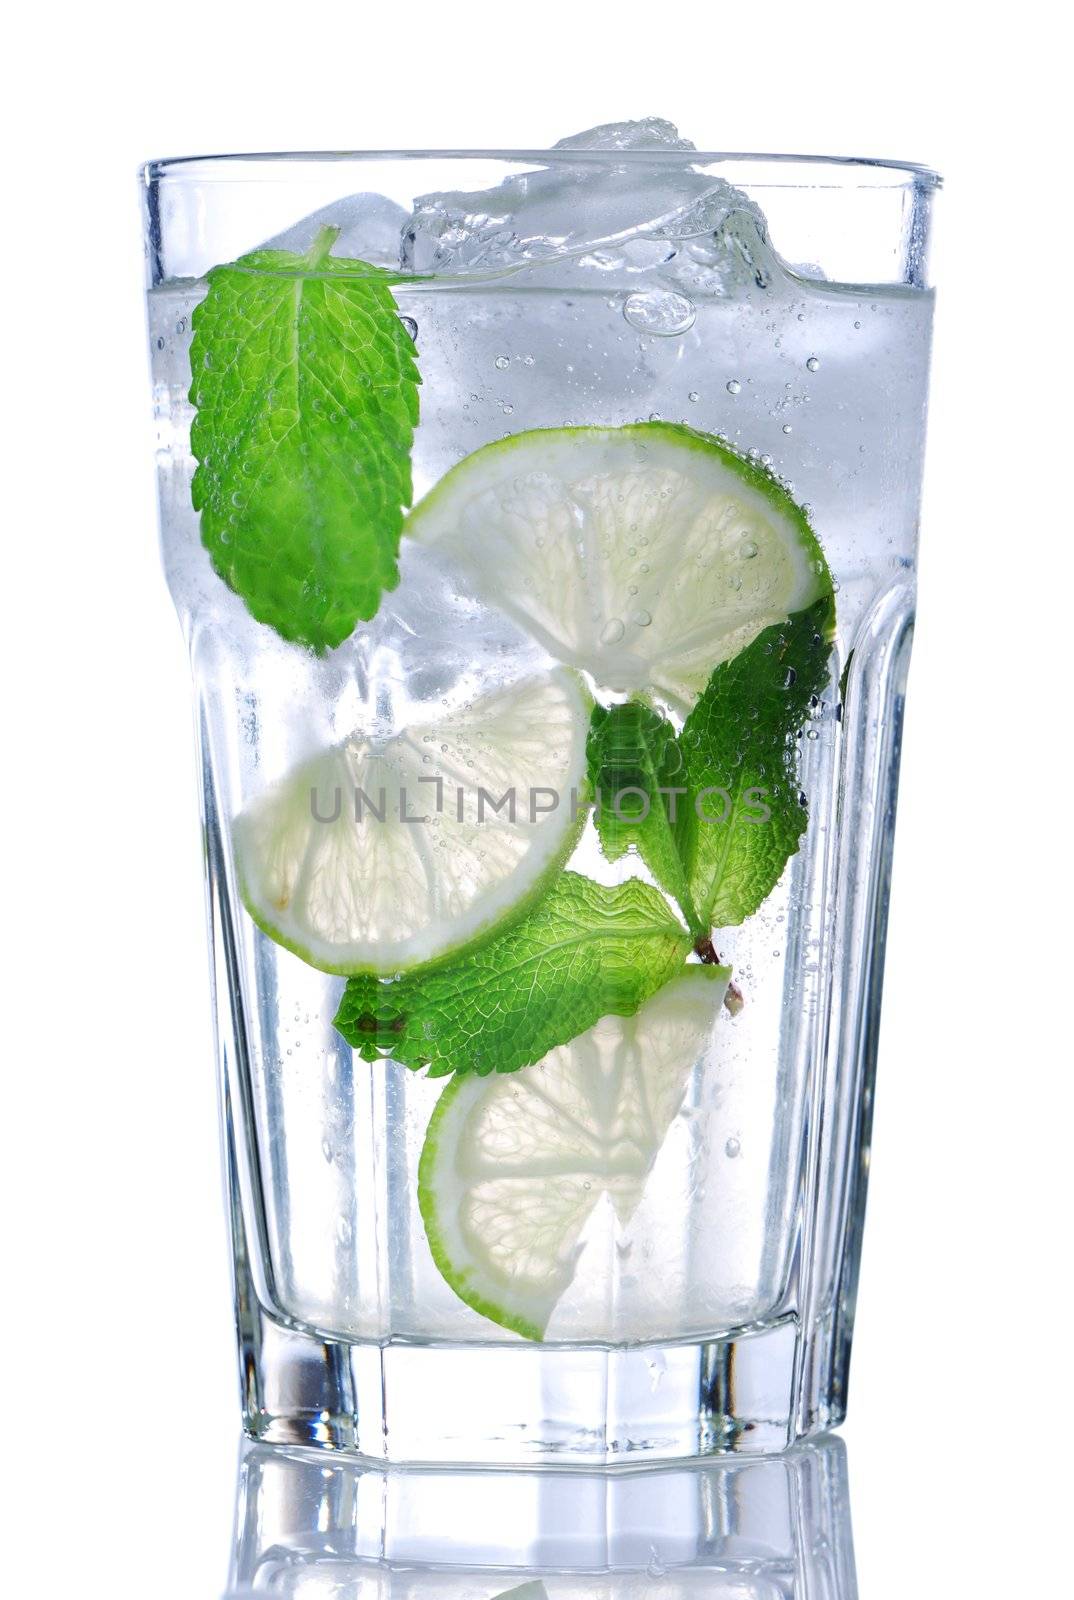 Mojito cocktail isolated on white